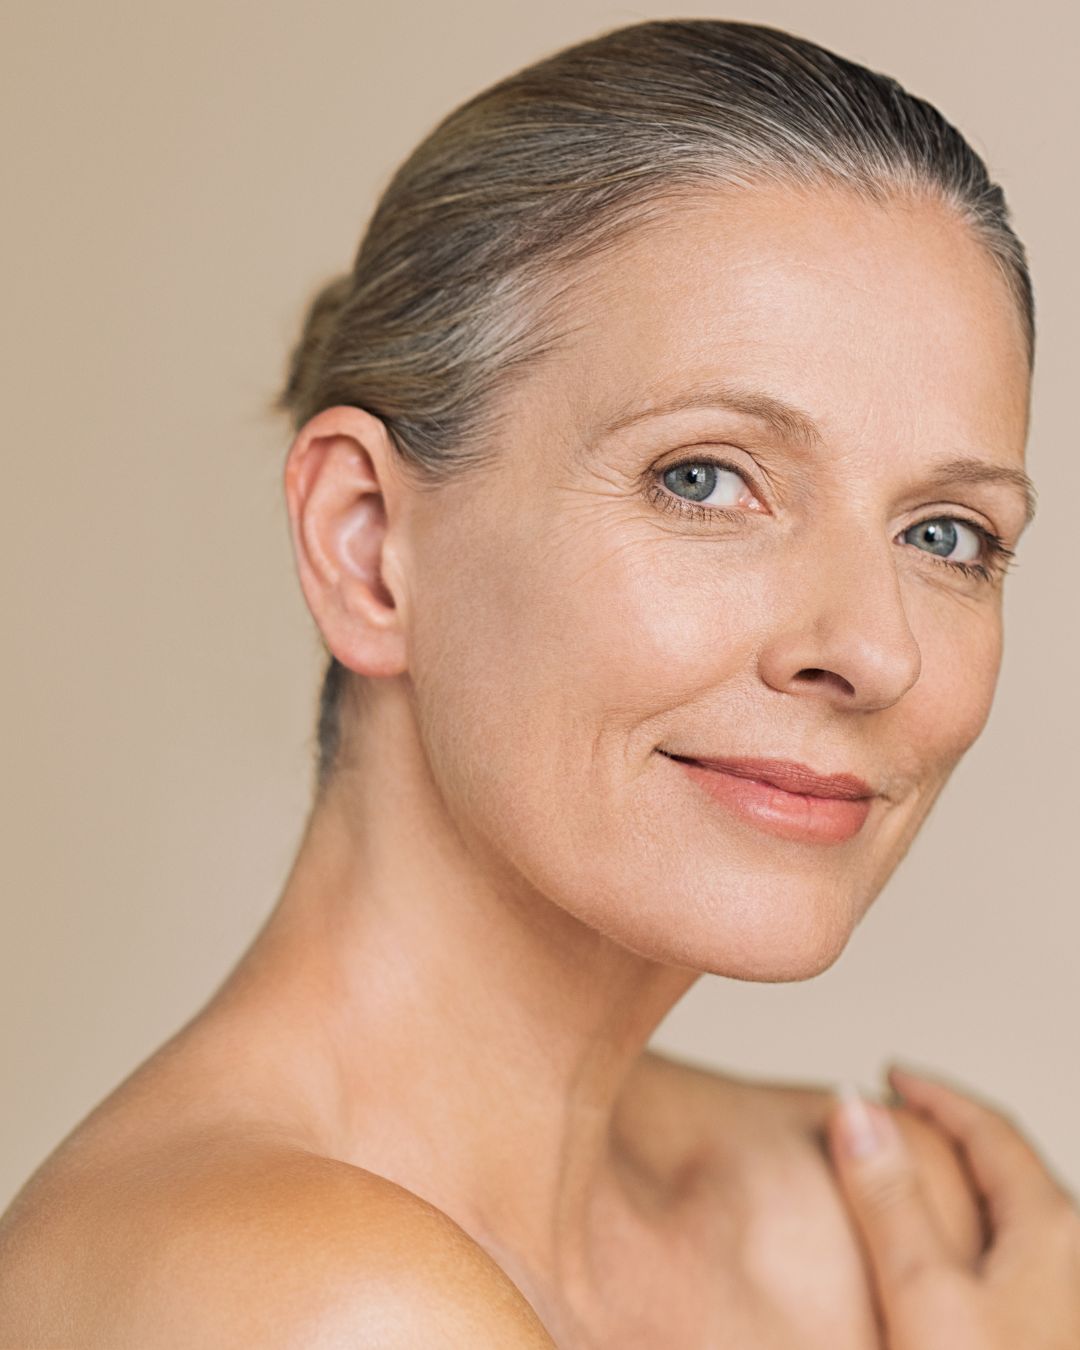 When used on the jawline and lower face, cryotherapy ice globes can help tighten and lift sagging jowls.